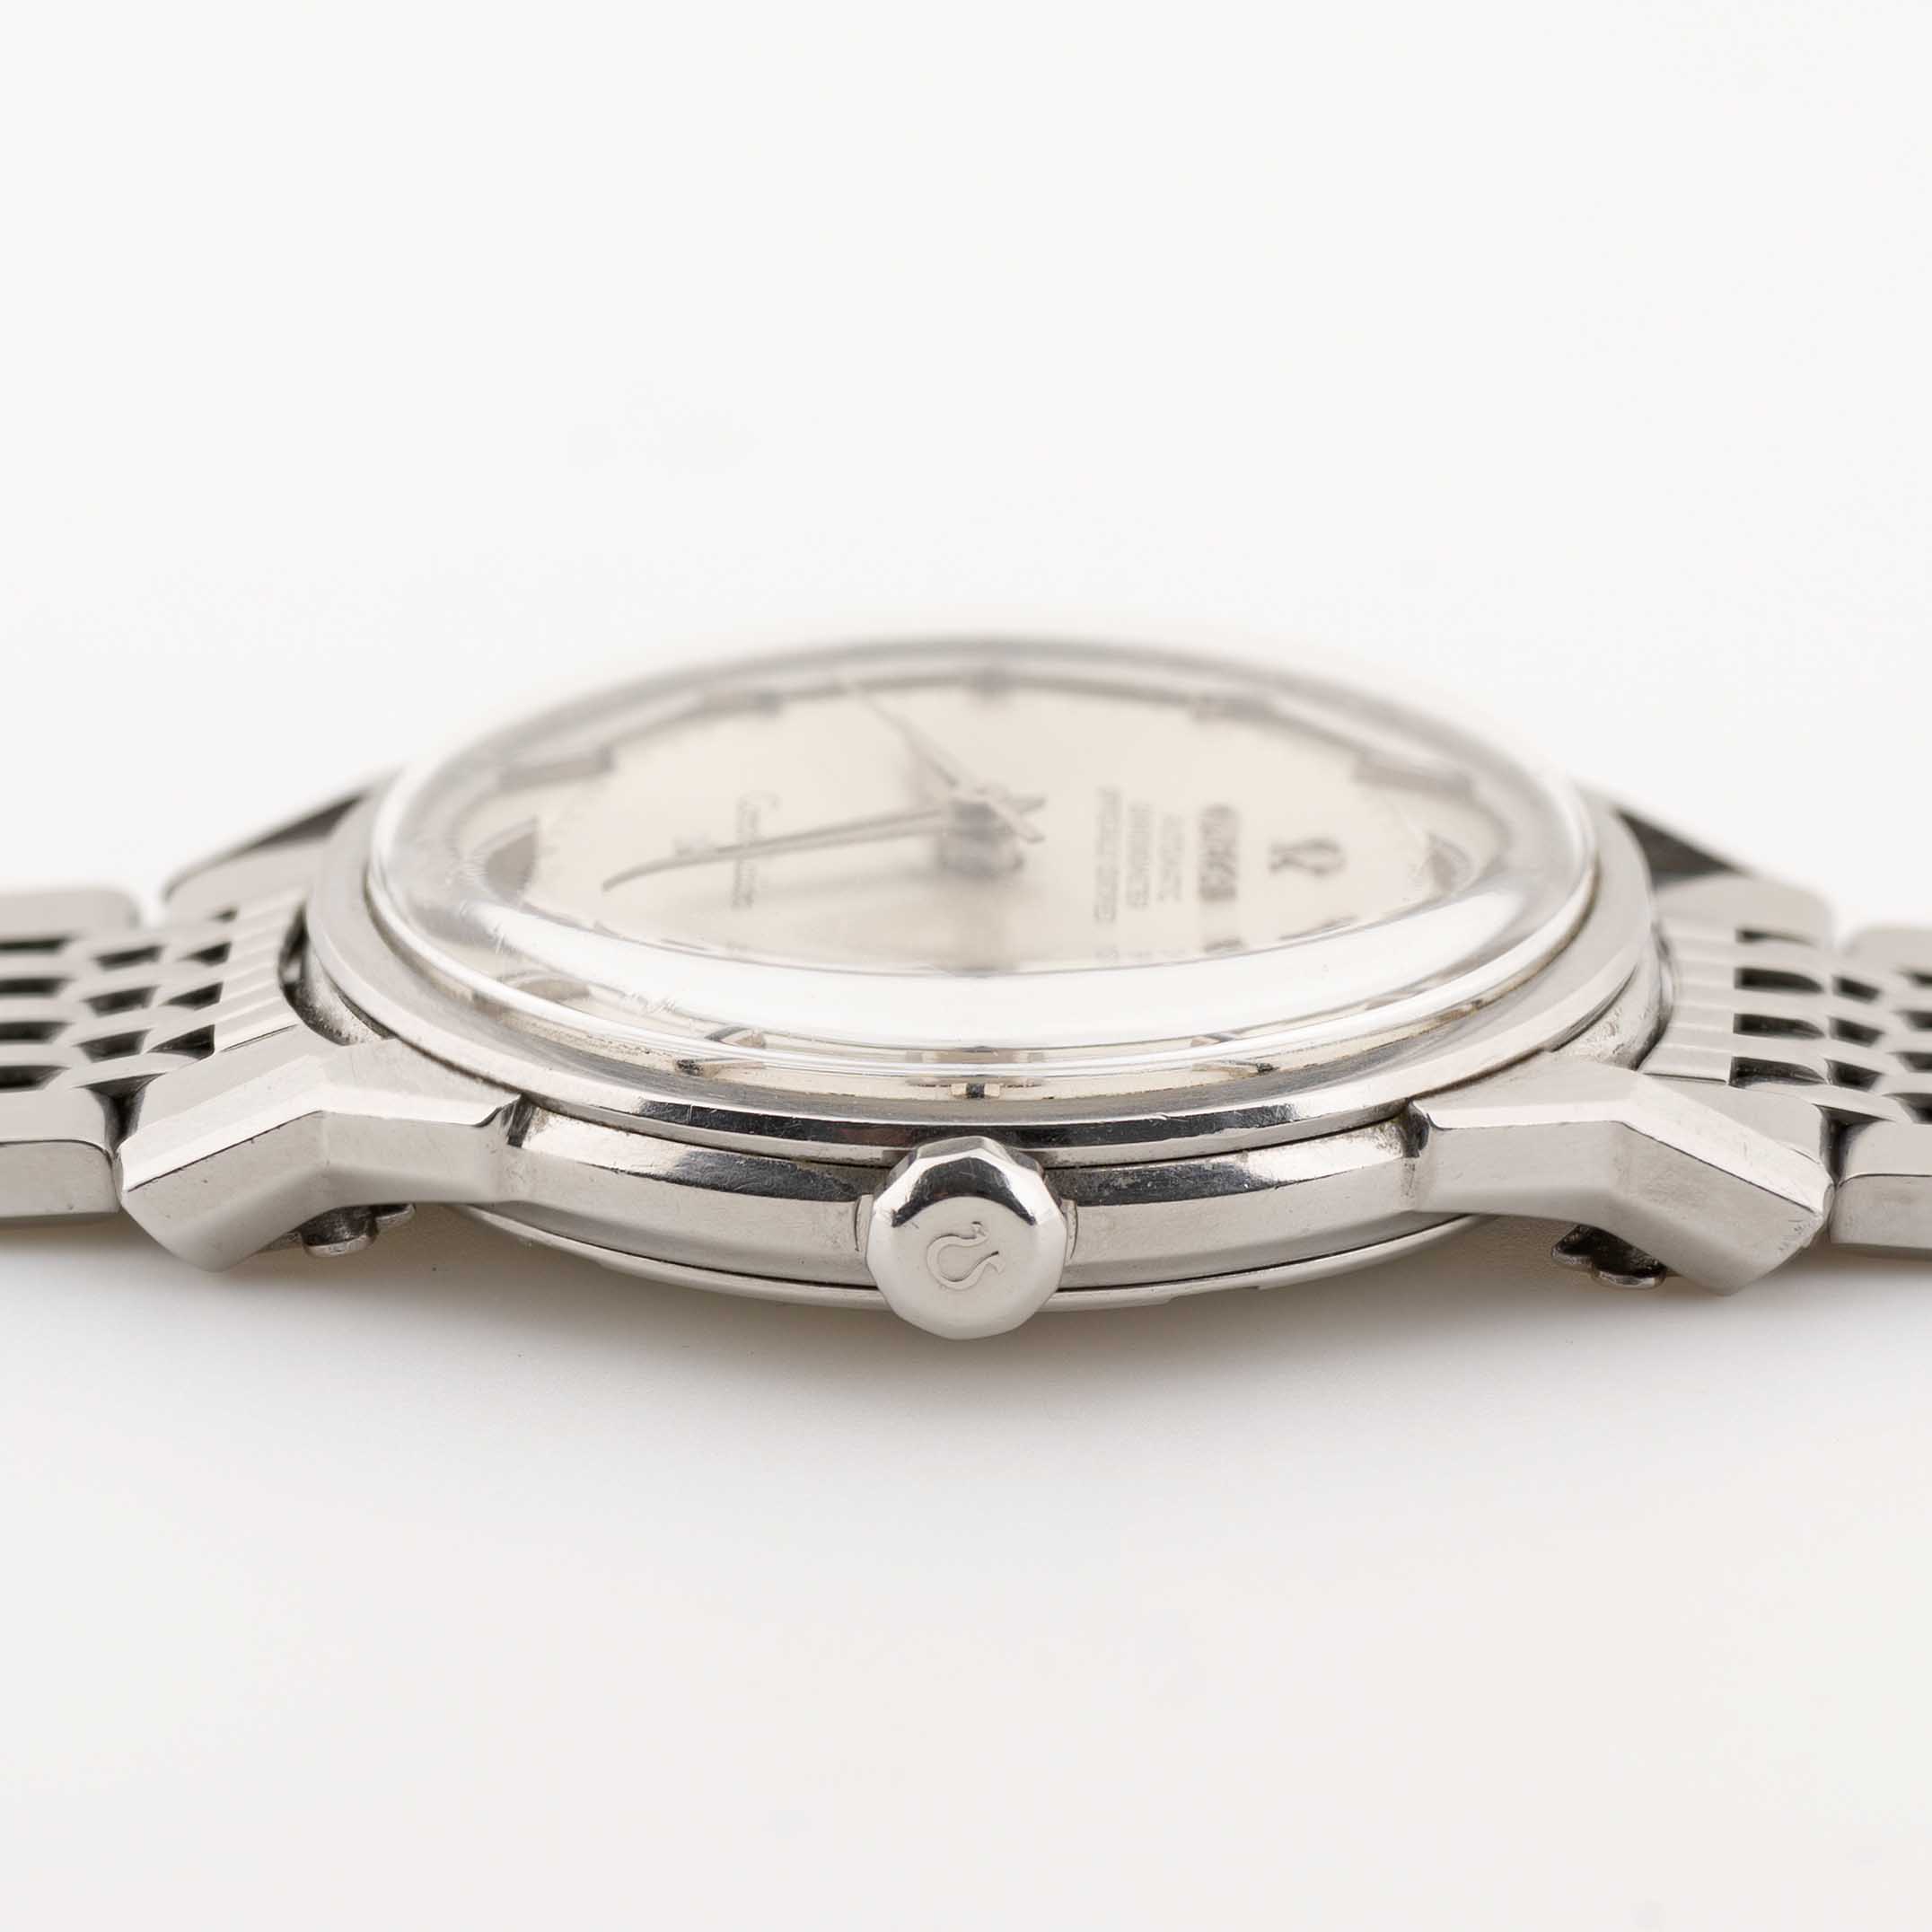 A GENTLEMAN'S STAINLESS STEEL OMEGA CONSTELLATION CHRONOMETER BRACELET WATCH CIRCA 1963, REF. 168. - Image 9 of 11